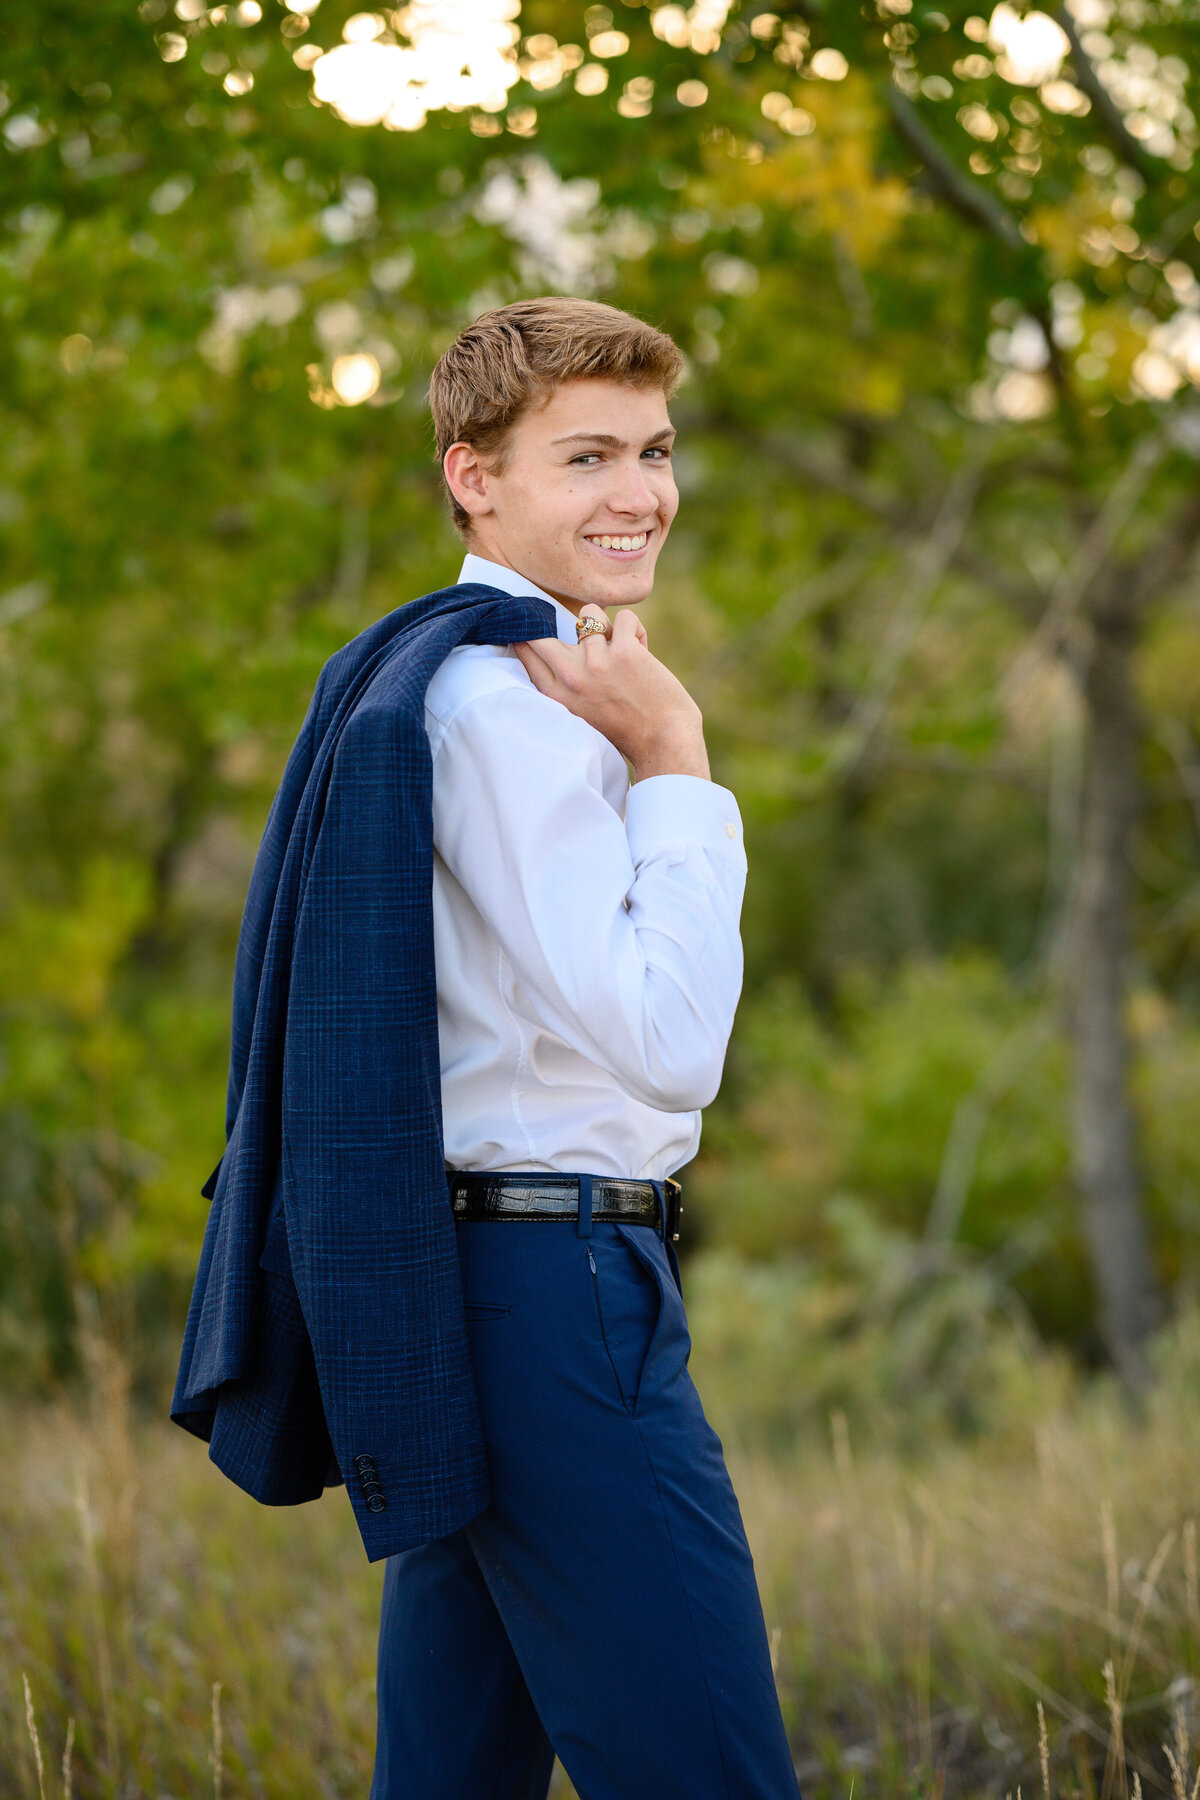 senior photo ideas for guys with a young man in a suit with the jacket slung over his shoulder